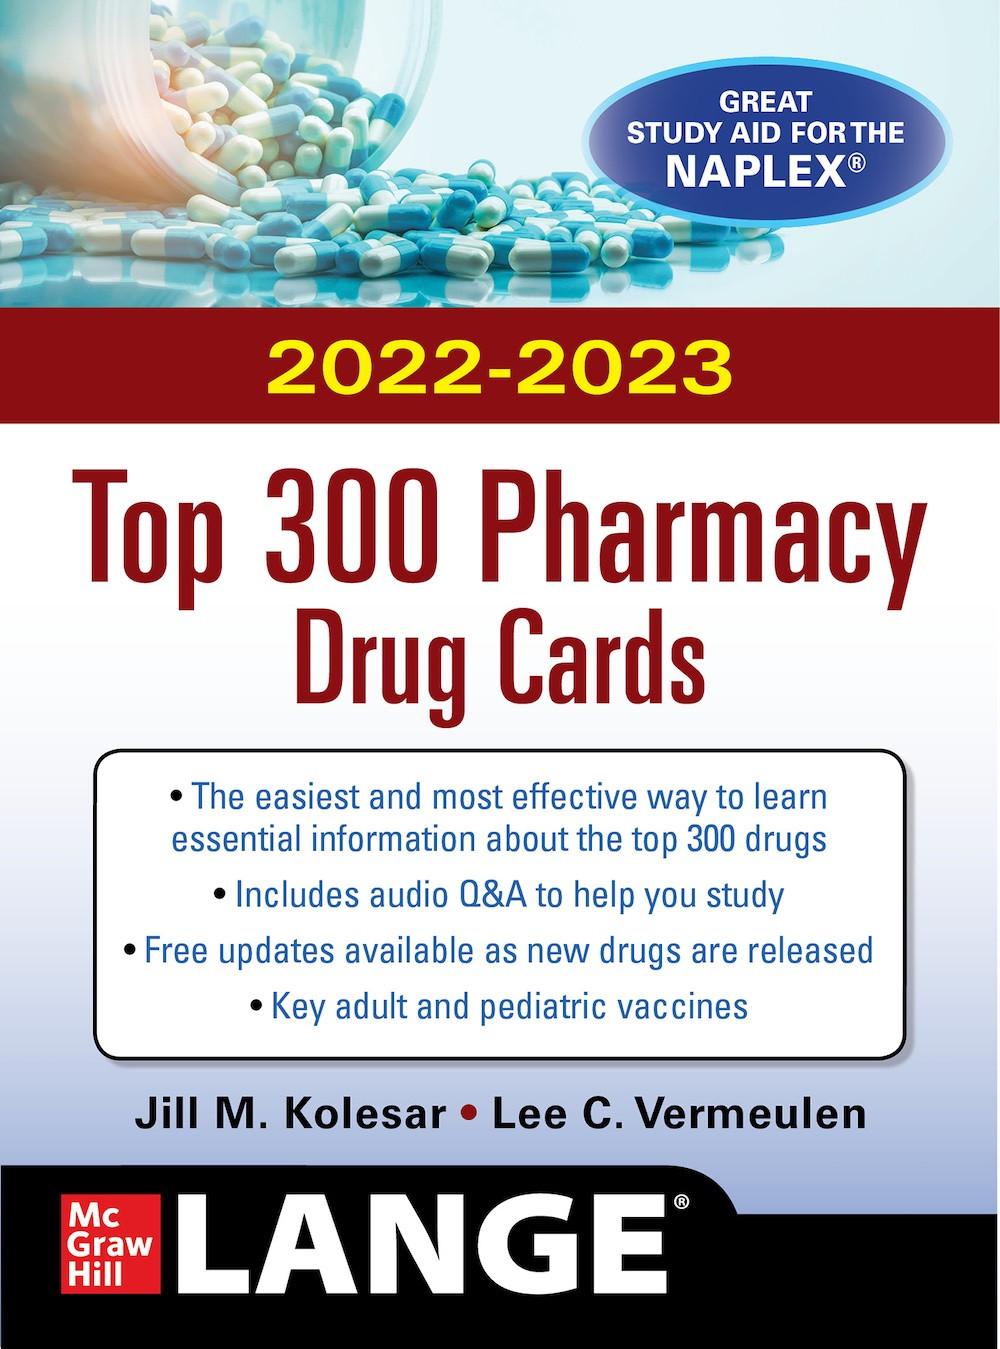 McGraw Hill`s 2022/2023 Top 300 Pharmacy Drug Cards